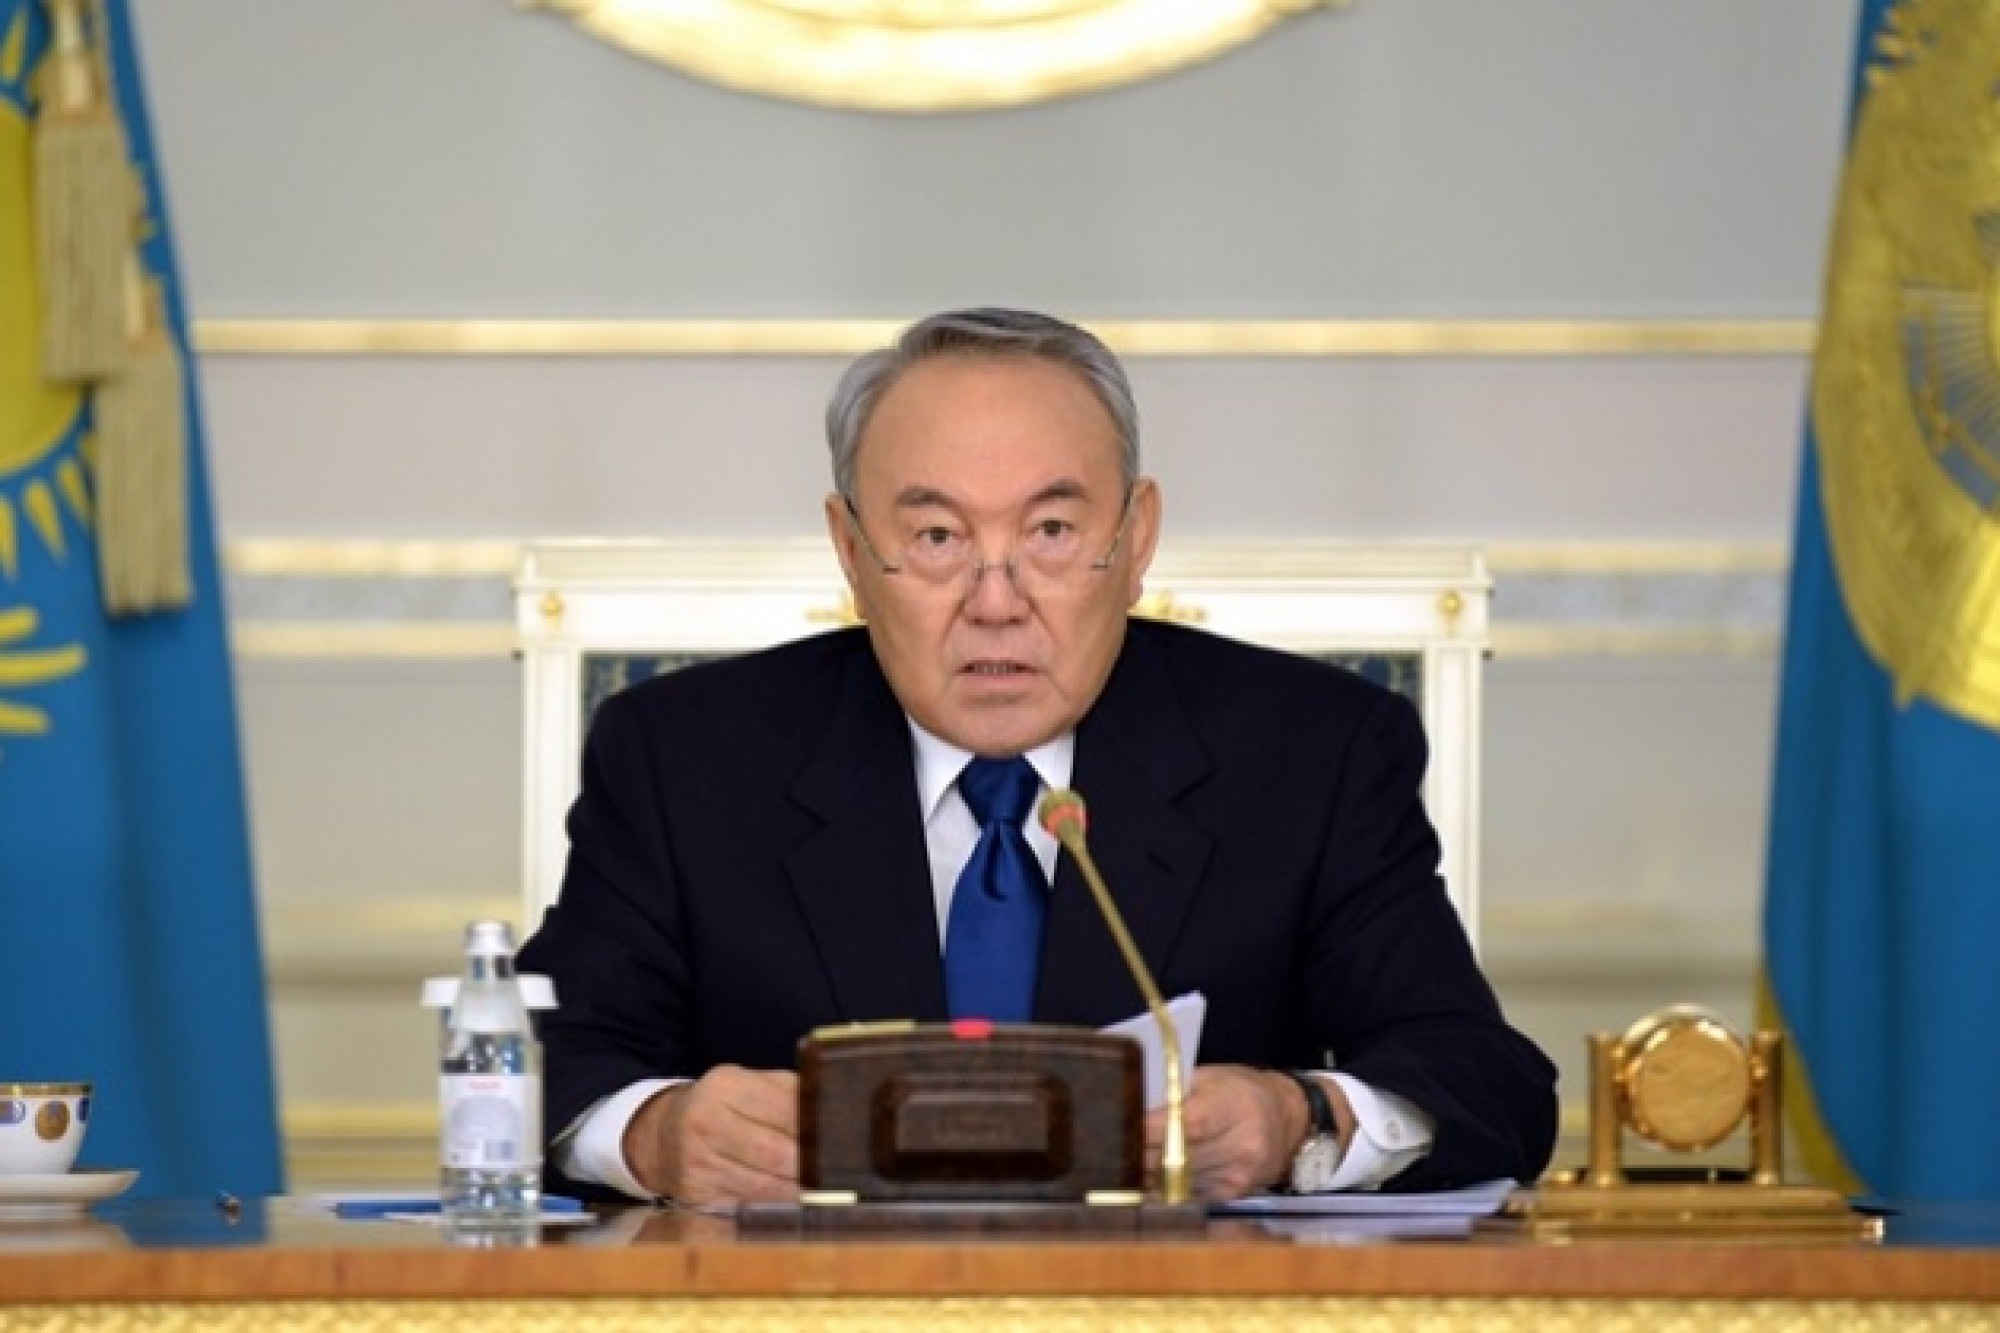 Kazakh President to deliver an annual Address to the people of Kazakhstan